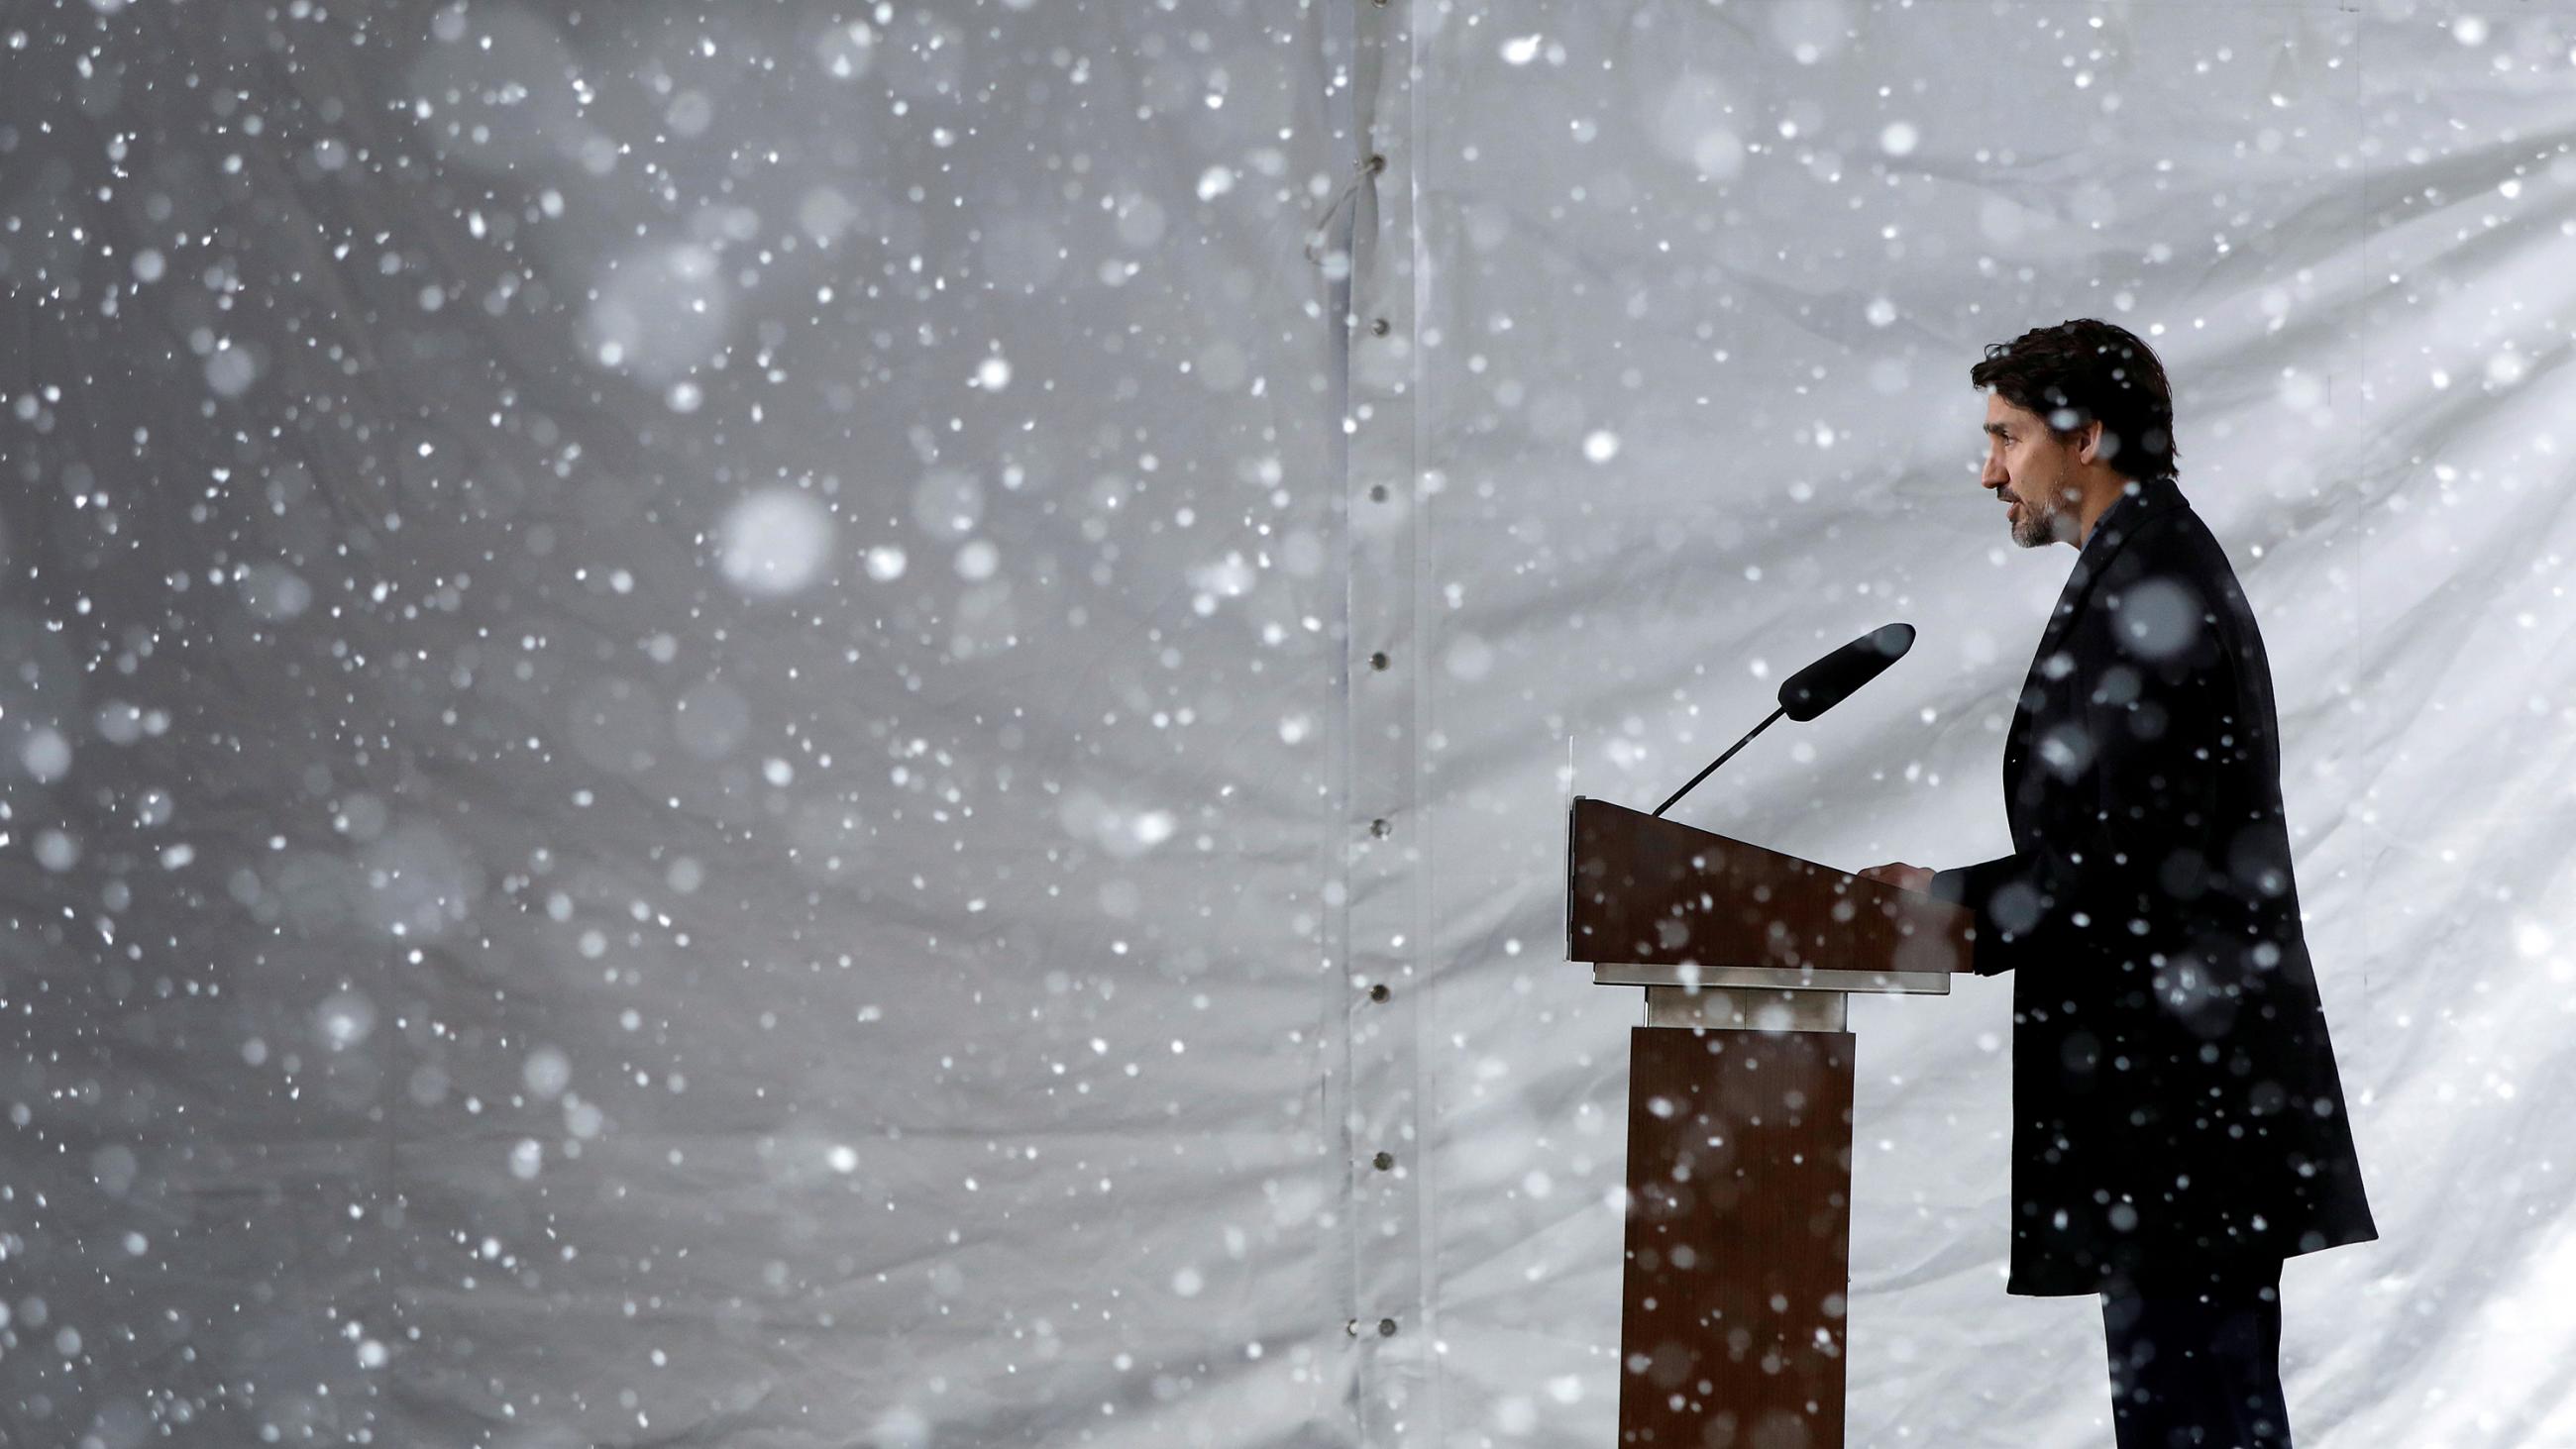 The photo shows the prime minister from the side standing at a podium while a driving snowstorm can be seen in the photo. 